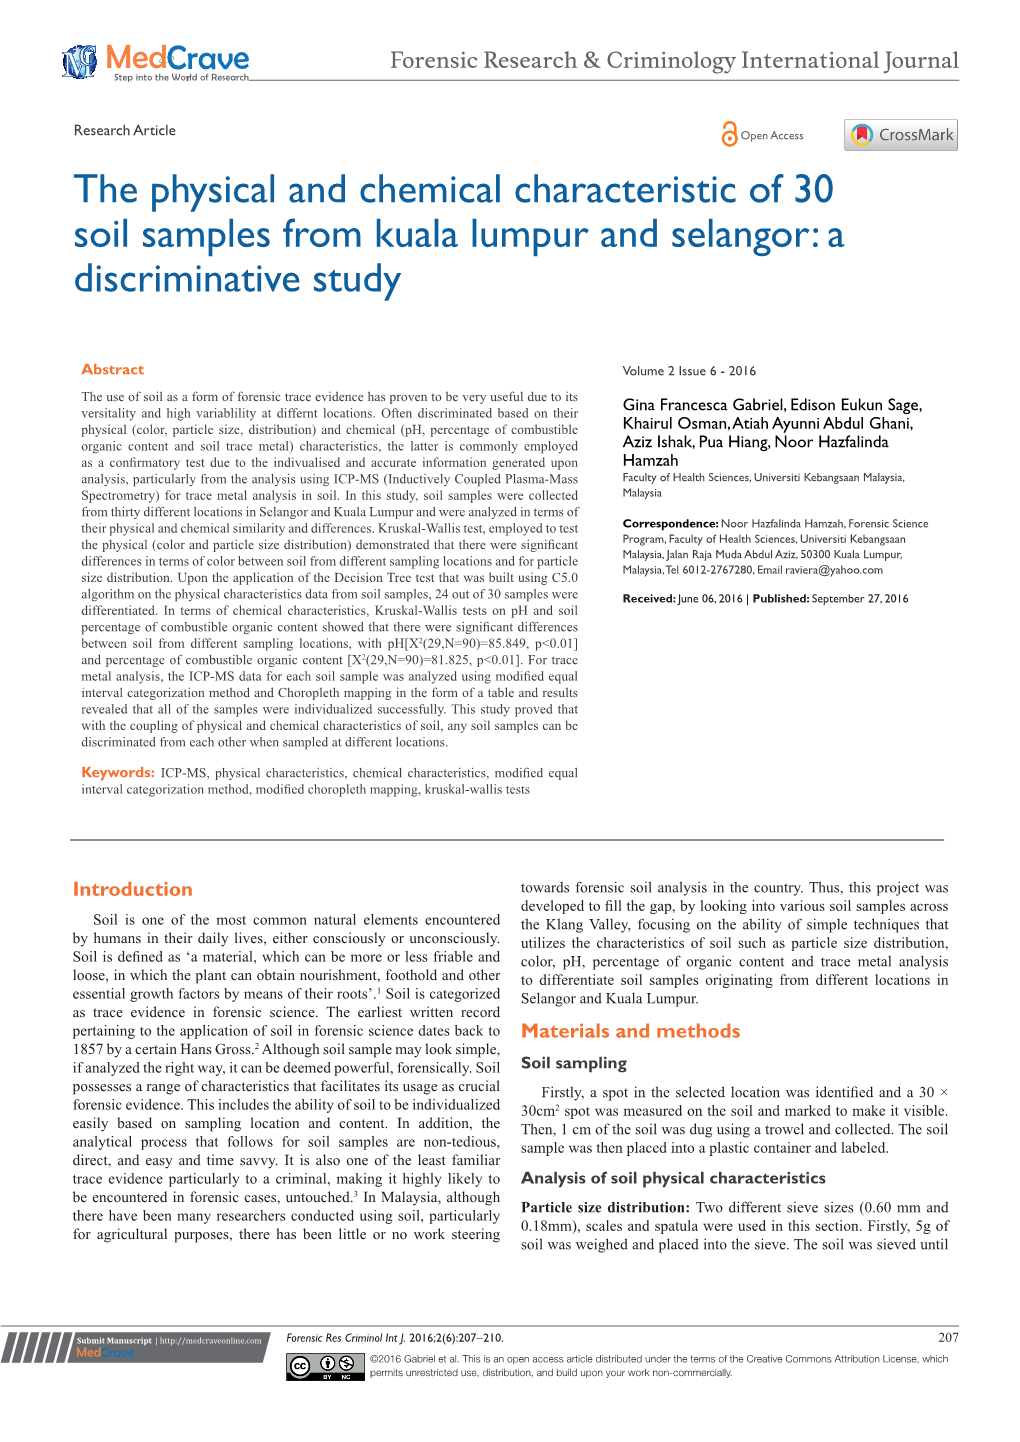 The Physical and Chemical Characteristic of 30 Soil Samples from Kuala Lumpur and Selangor: a Discriminative Study